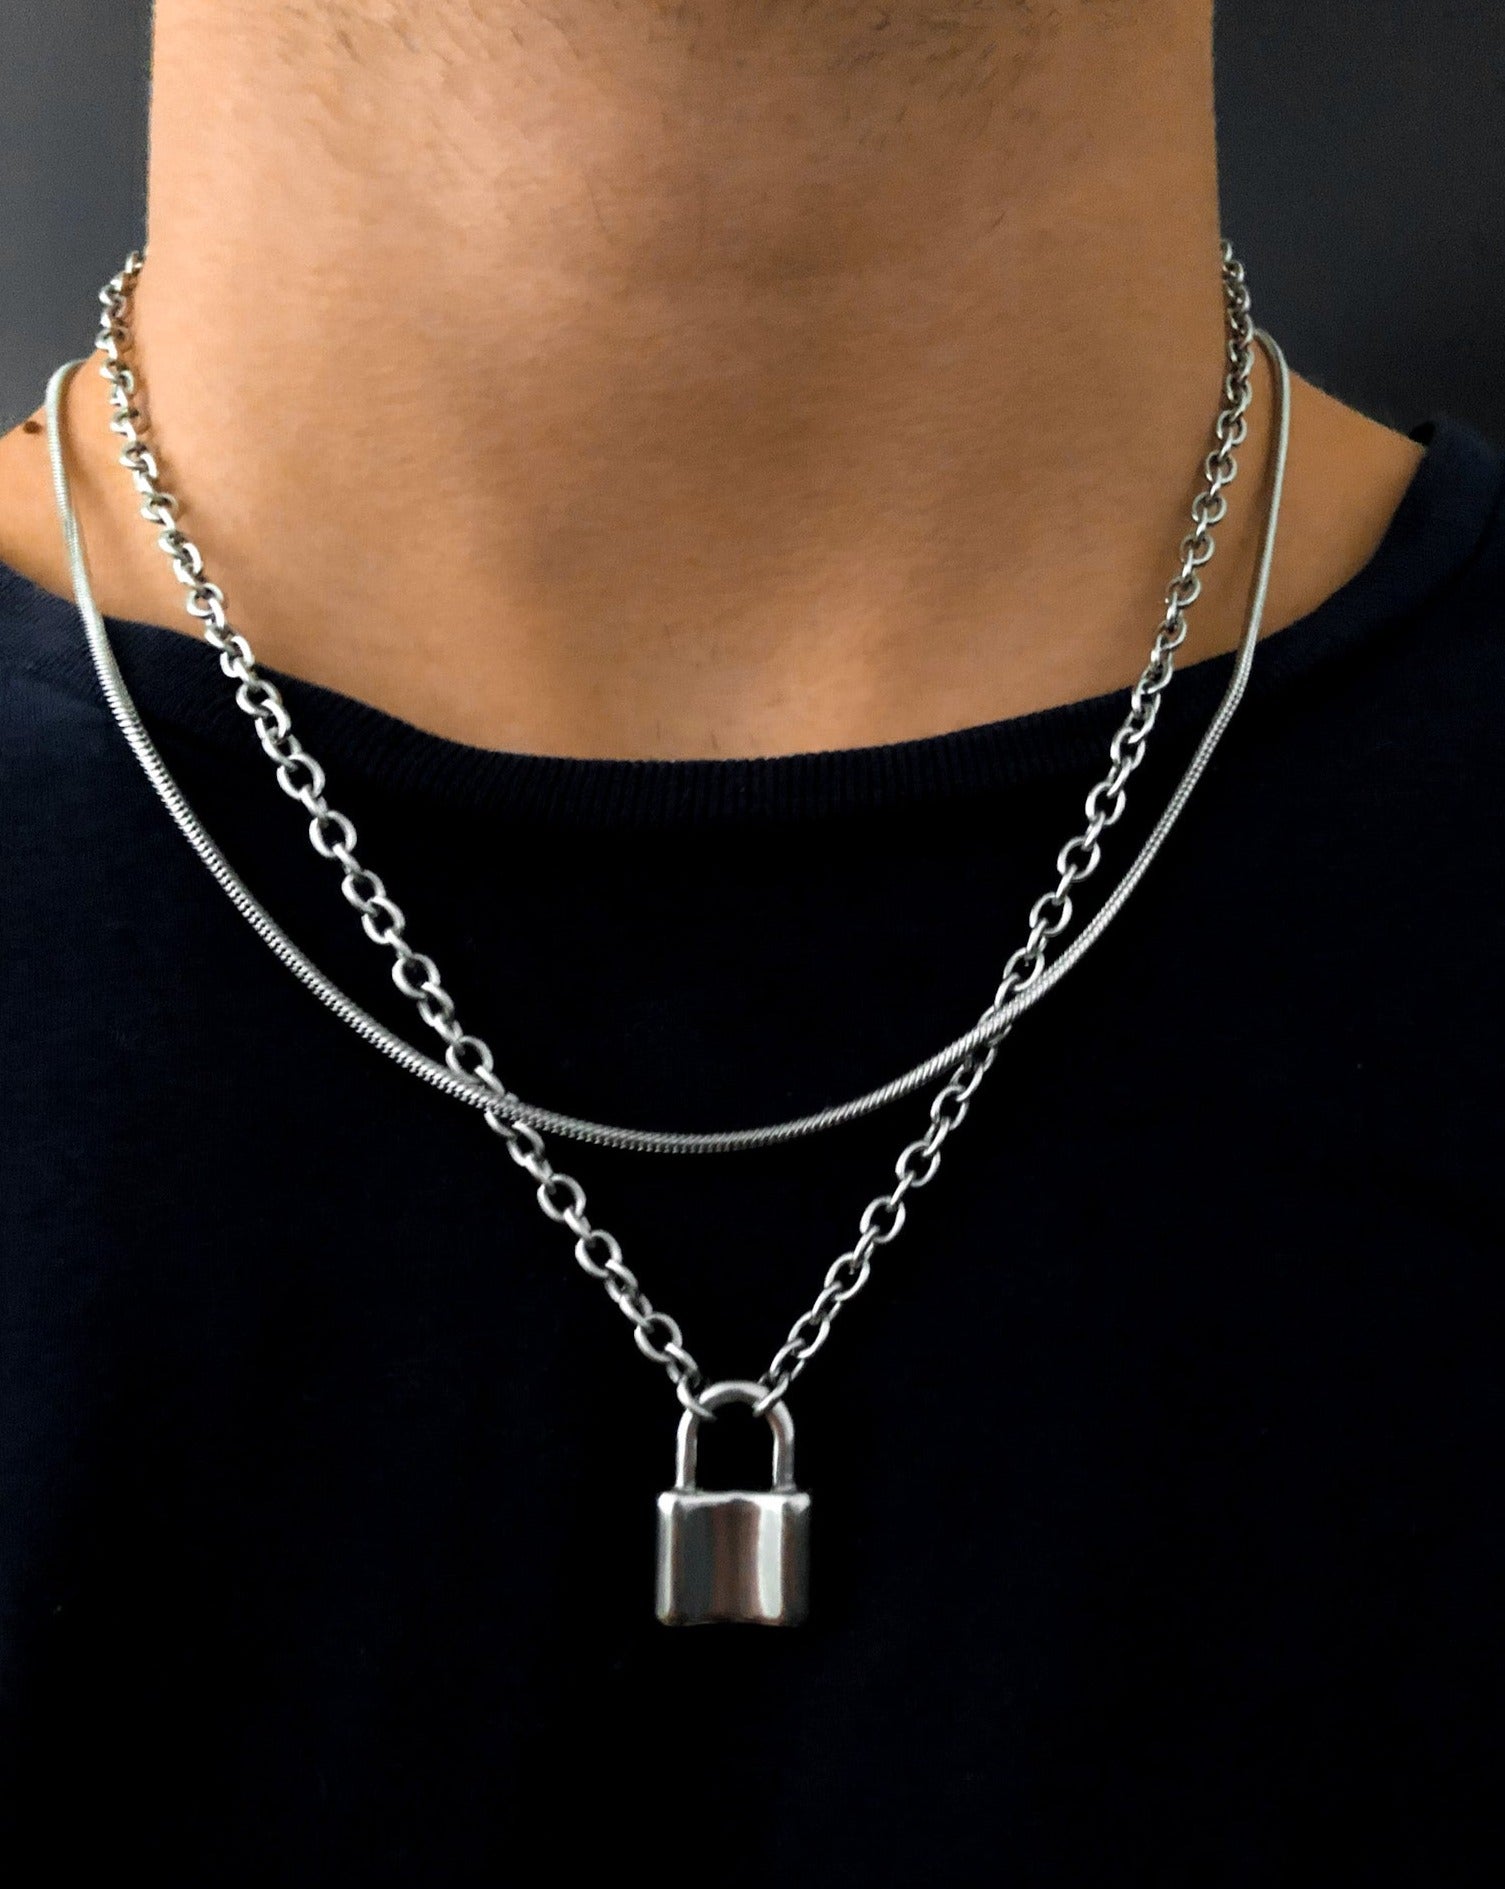 Buy Oversized Padlock Necklace Solid Stainless Steel Chain Silver Mens  Unisex Chunky Heavy Lock Key Handmade Jewelry Online in India - Etsy